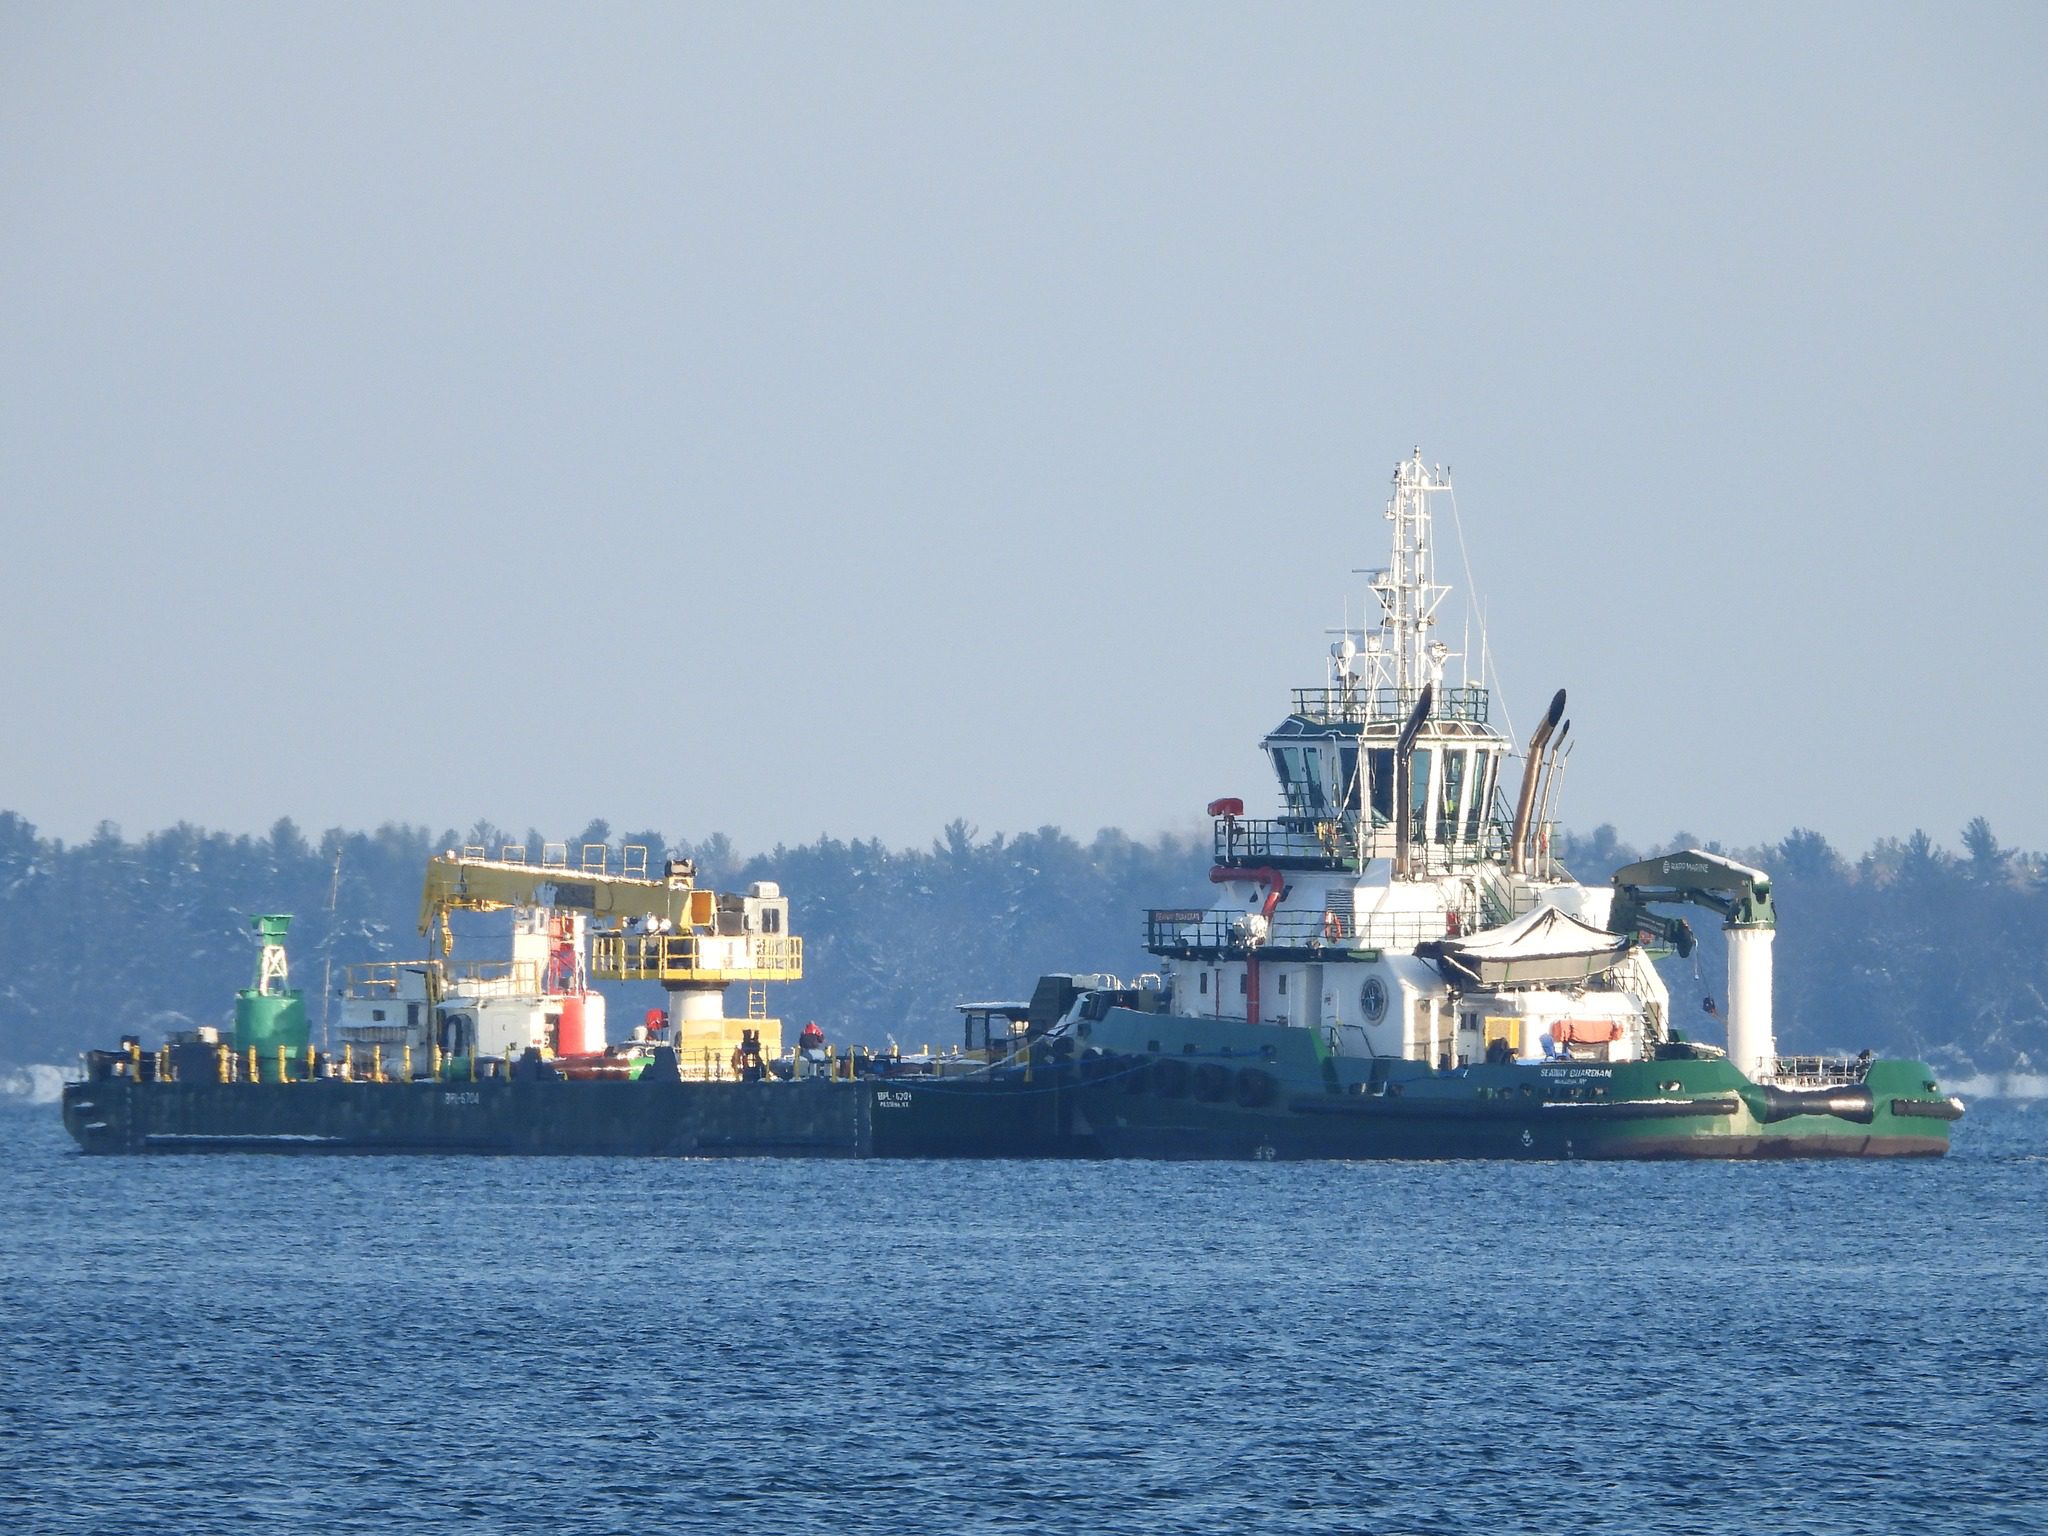 St Lawrence Seaway’s New Tug Experiences Issue Ahead of 2022 Buoy Pull